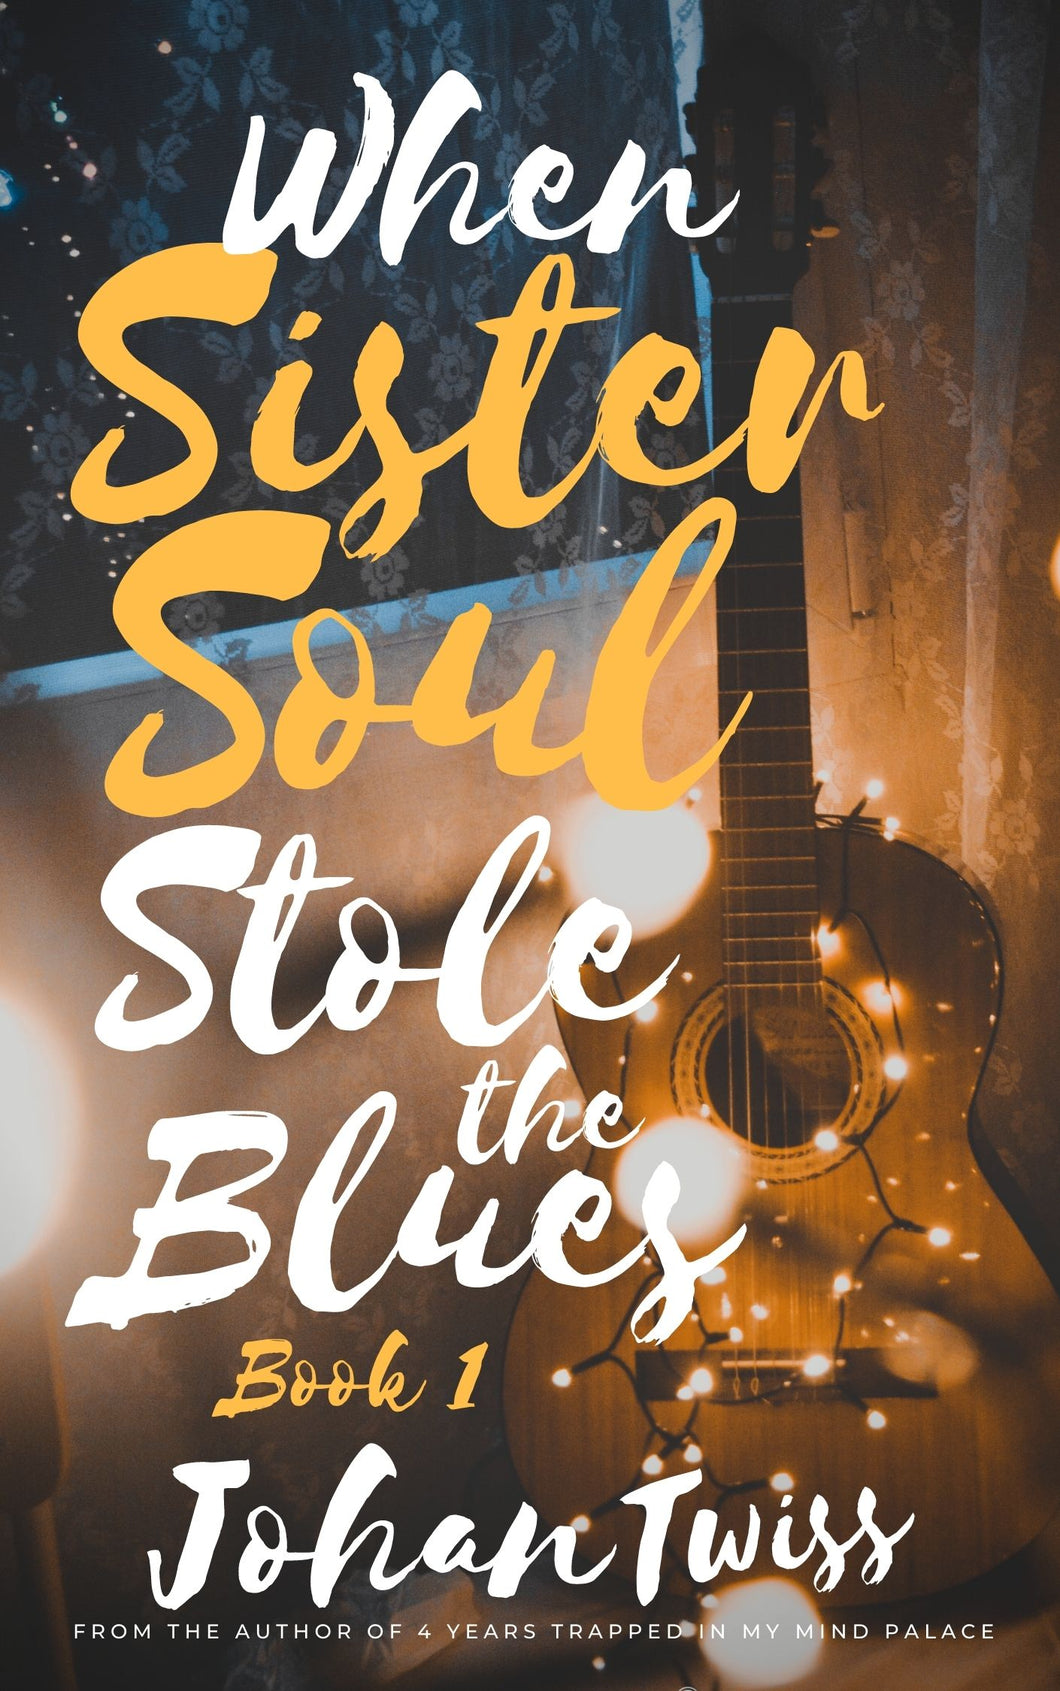 When Sister Soul Stole the Blues - Book 1 (Signed Paperback)